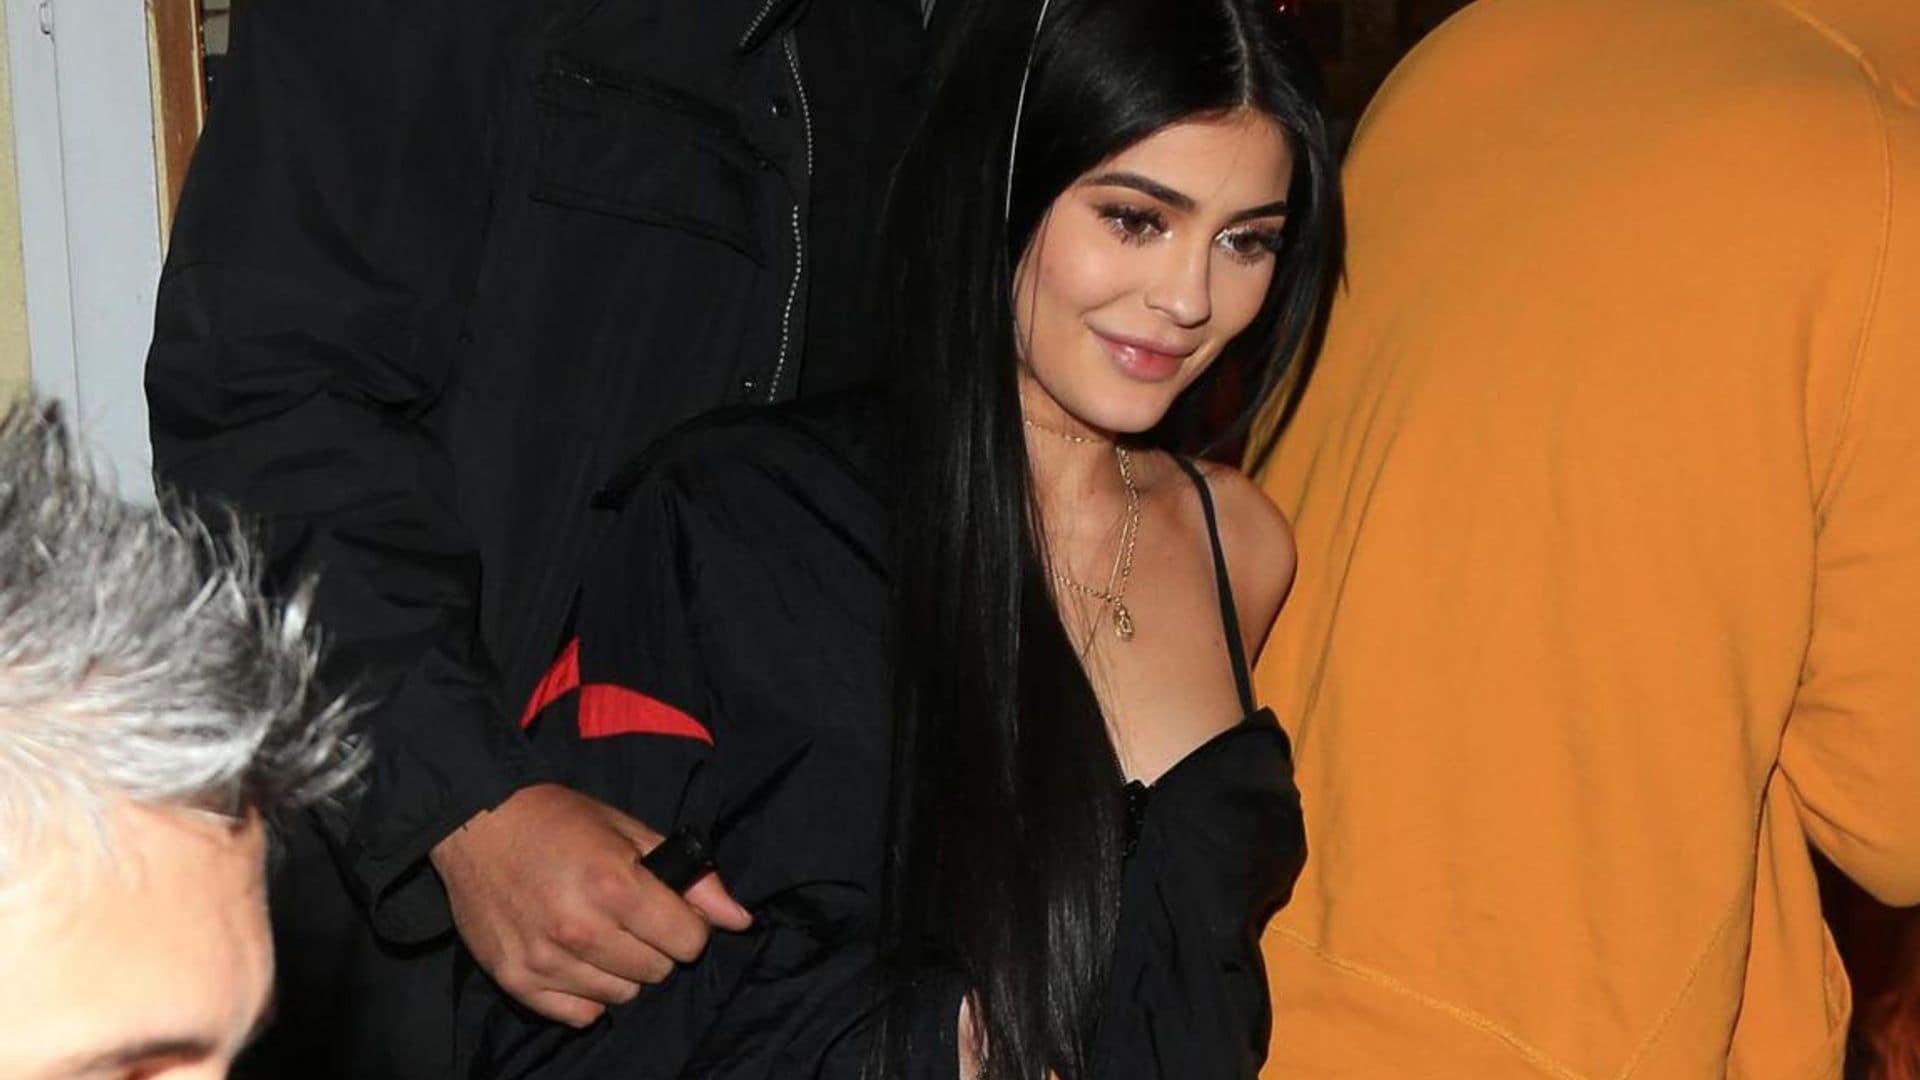 Kylie Jenner pairs brown stiletto nails with a $300K bag